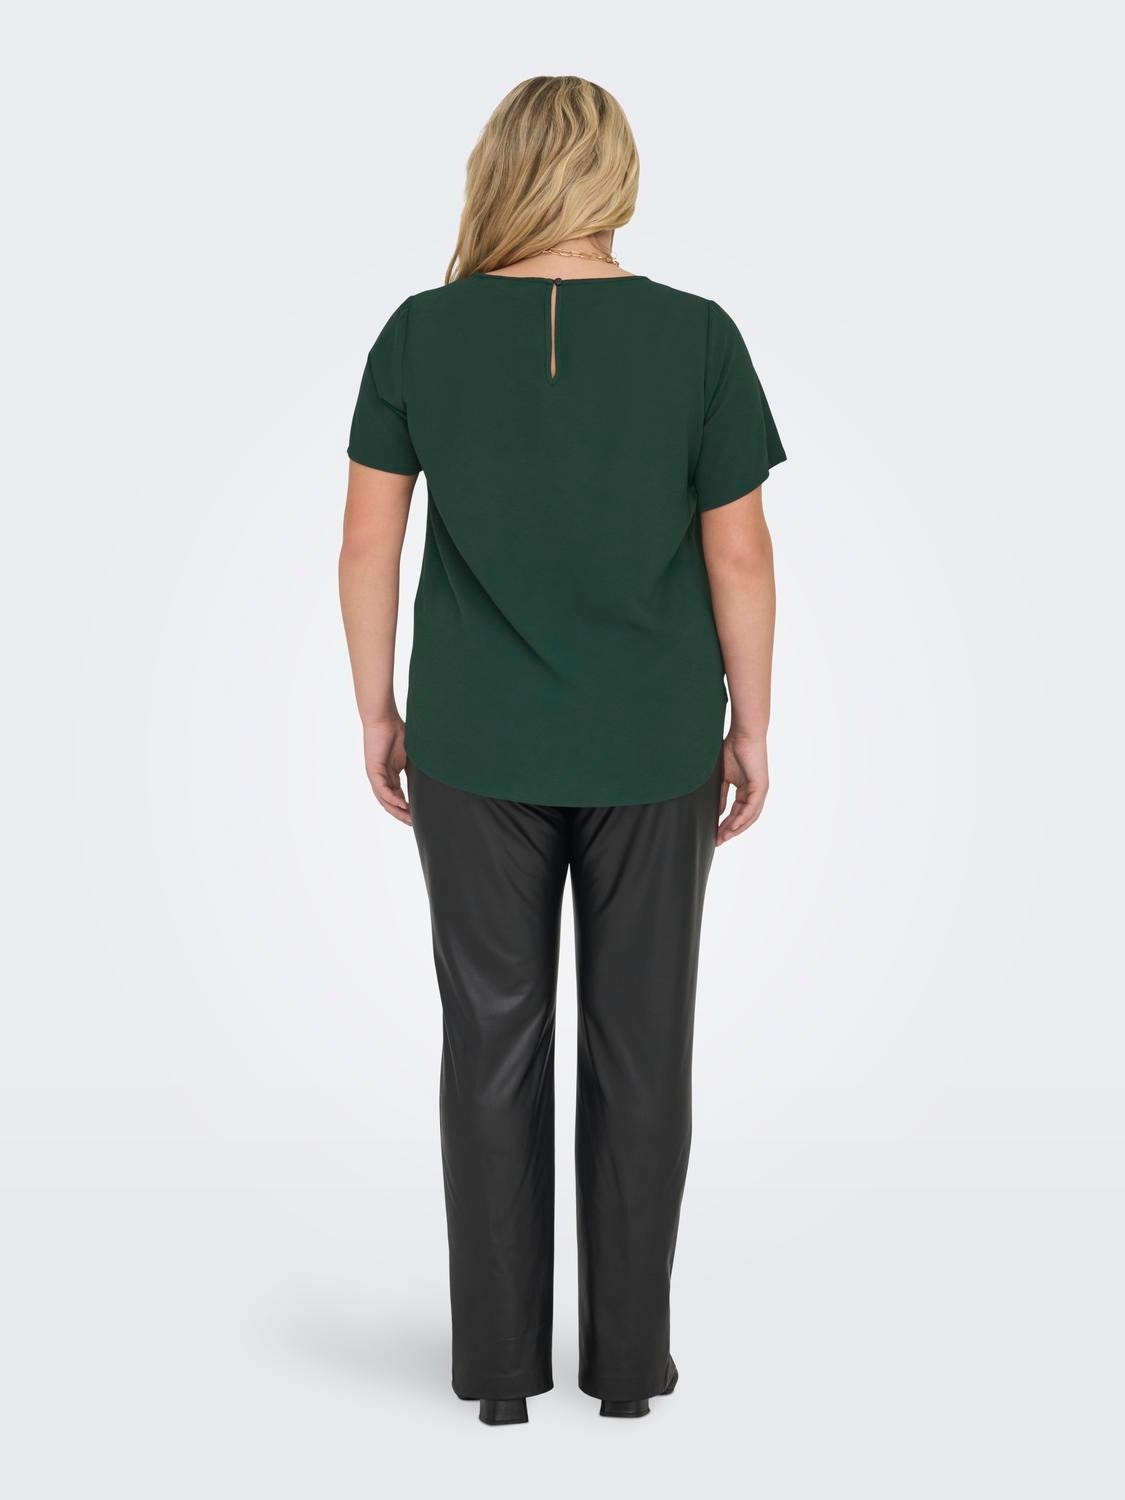 ONLY Curvy short sleeve Top -Green Gables - 15218353